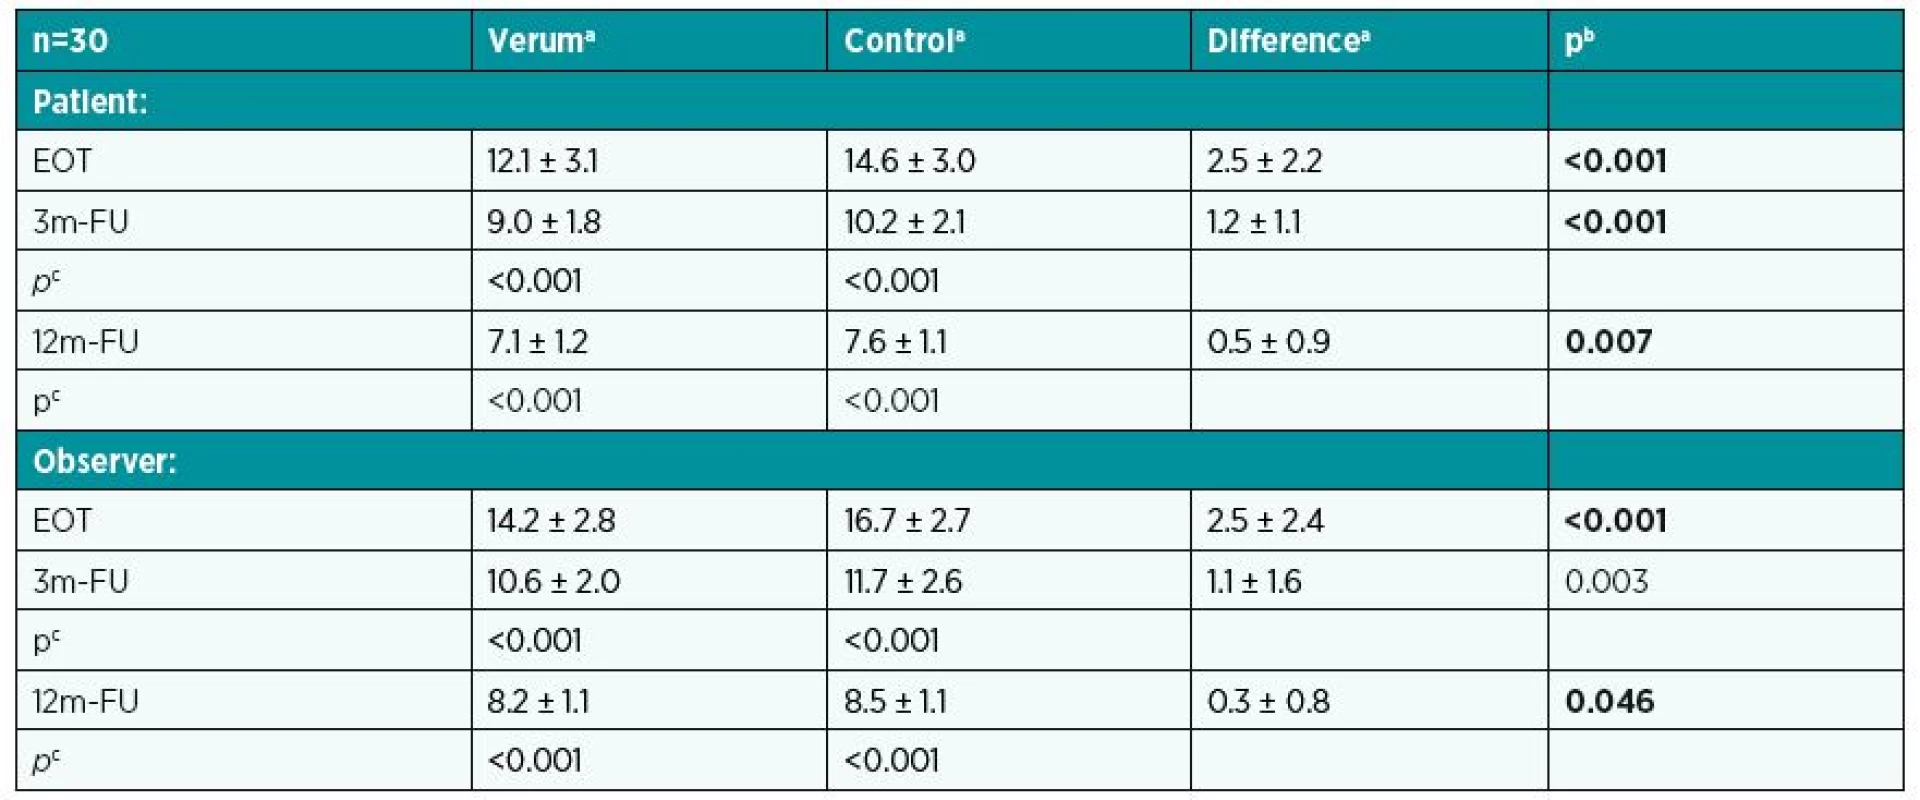 POSAS – comparing effects of verum and control at various times on patient and observer scales